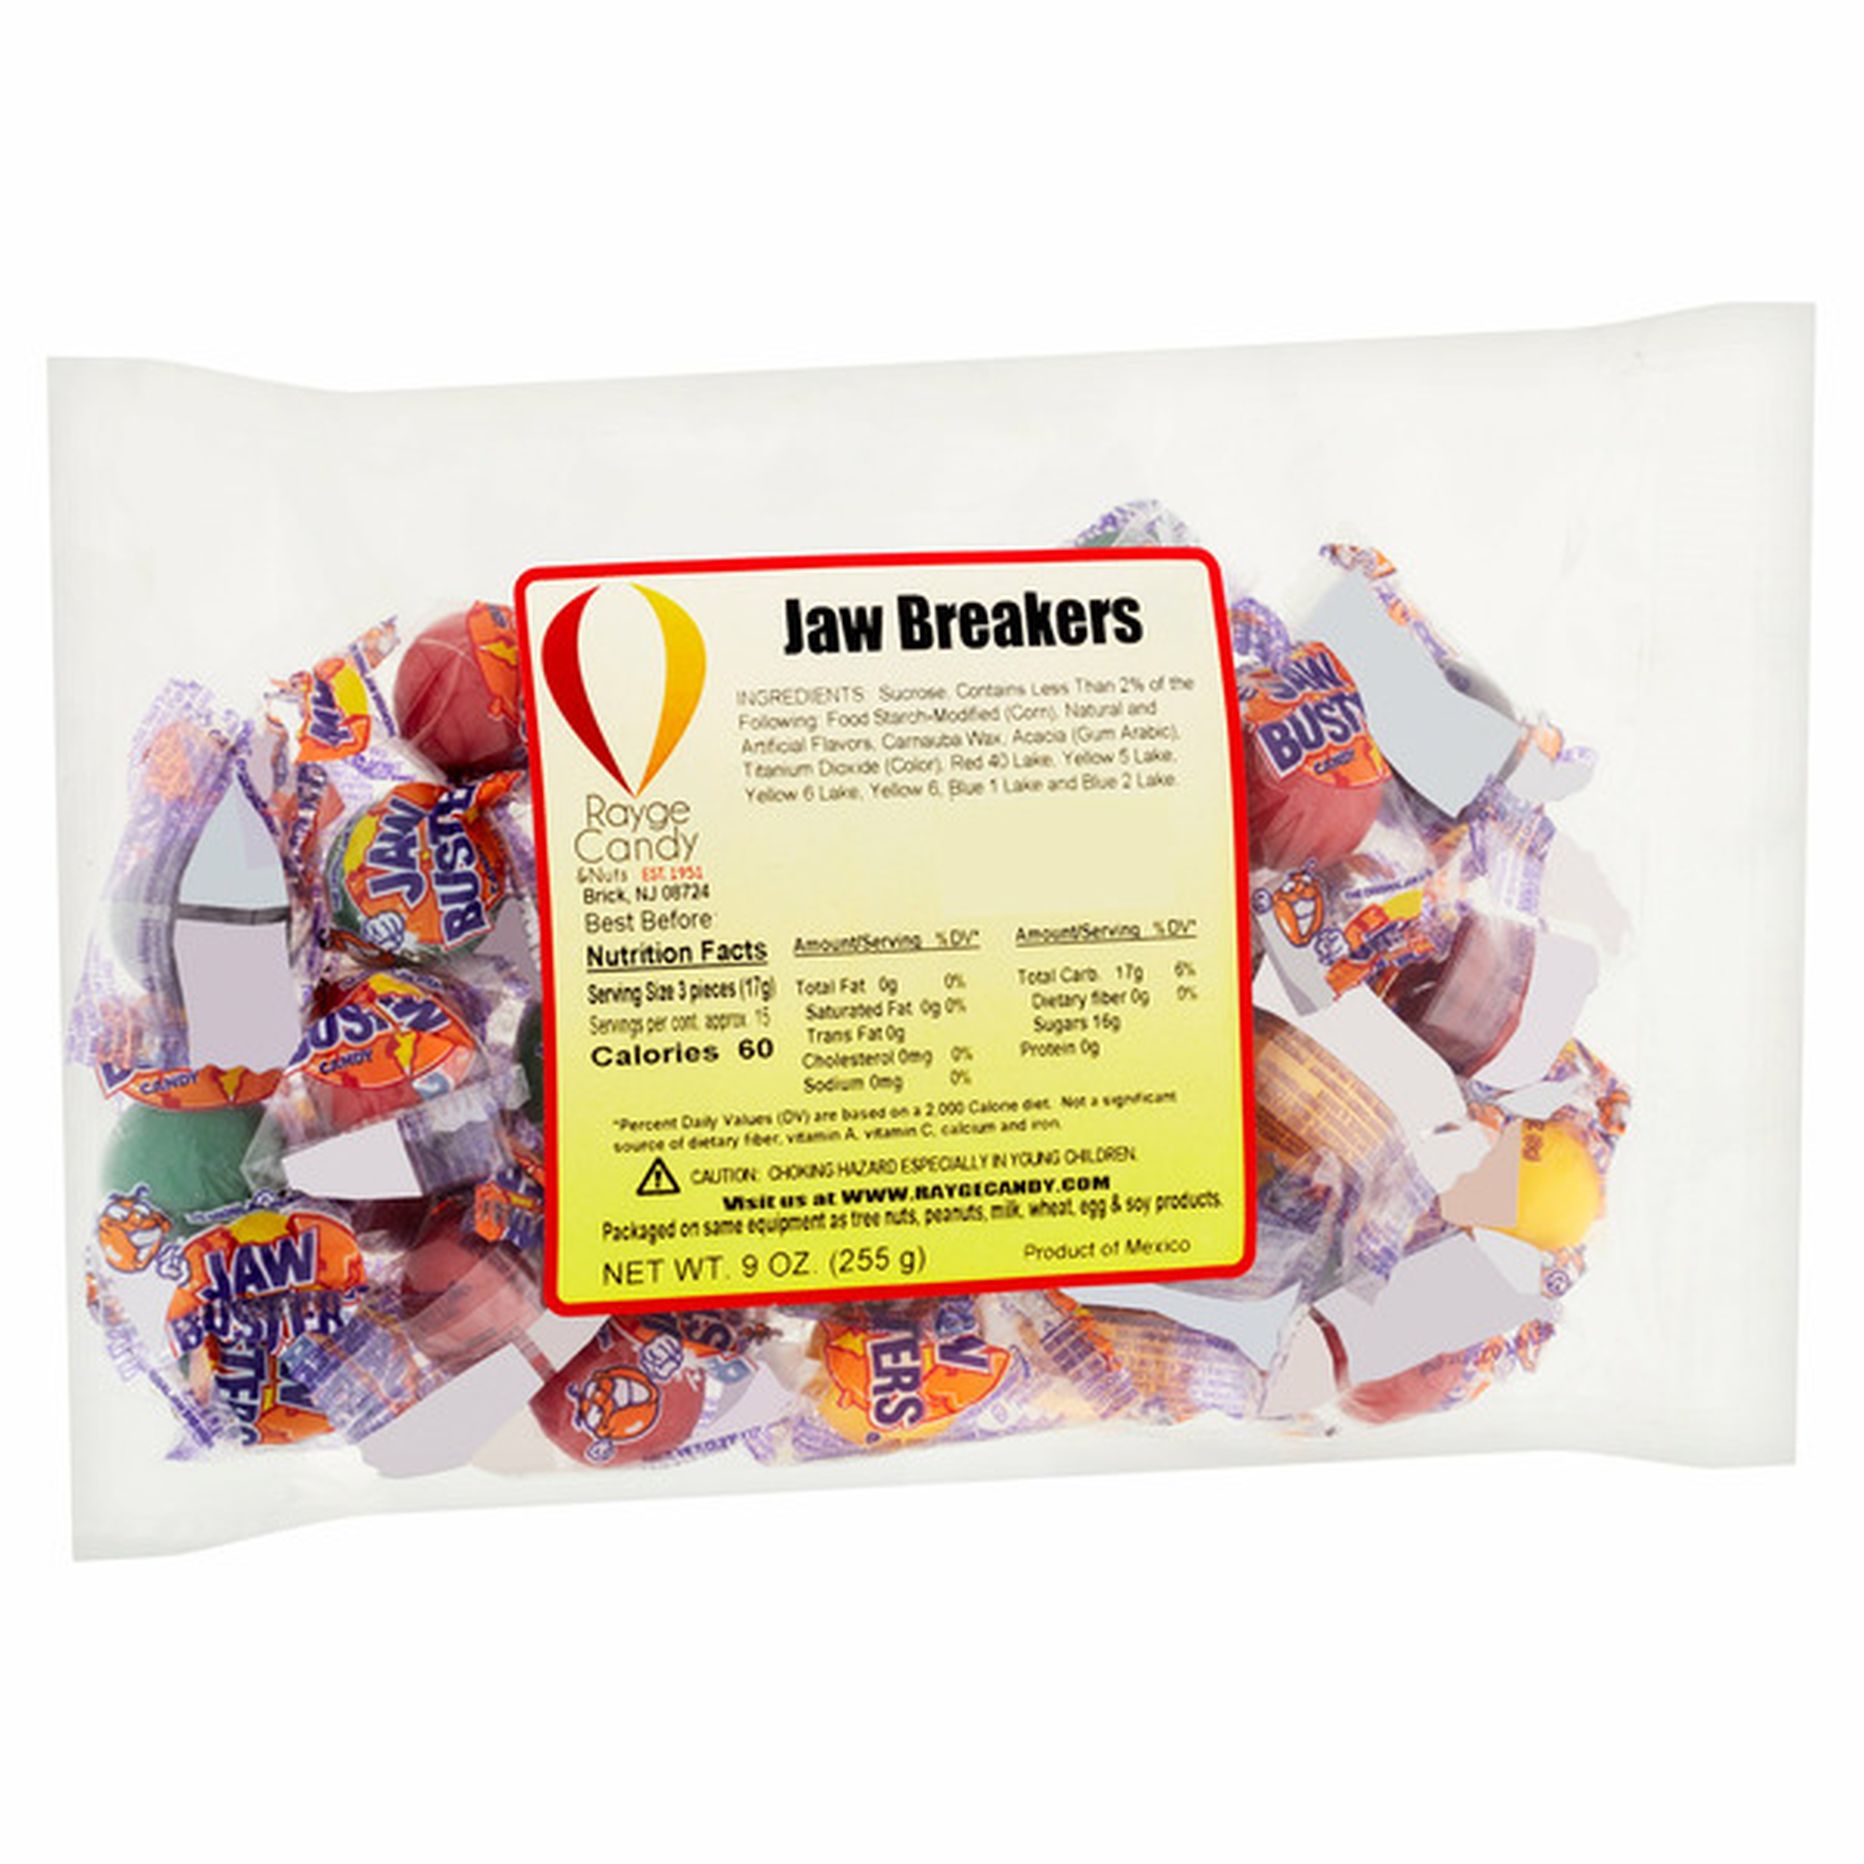 Rayge Candy & Nuts Jaw Breakers Candy (9 oz) Delivery or Pickup Near Me ...